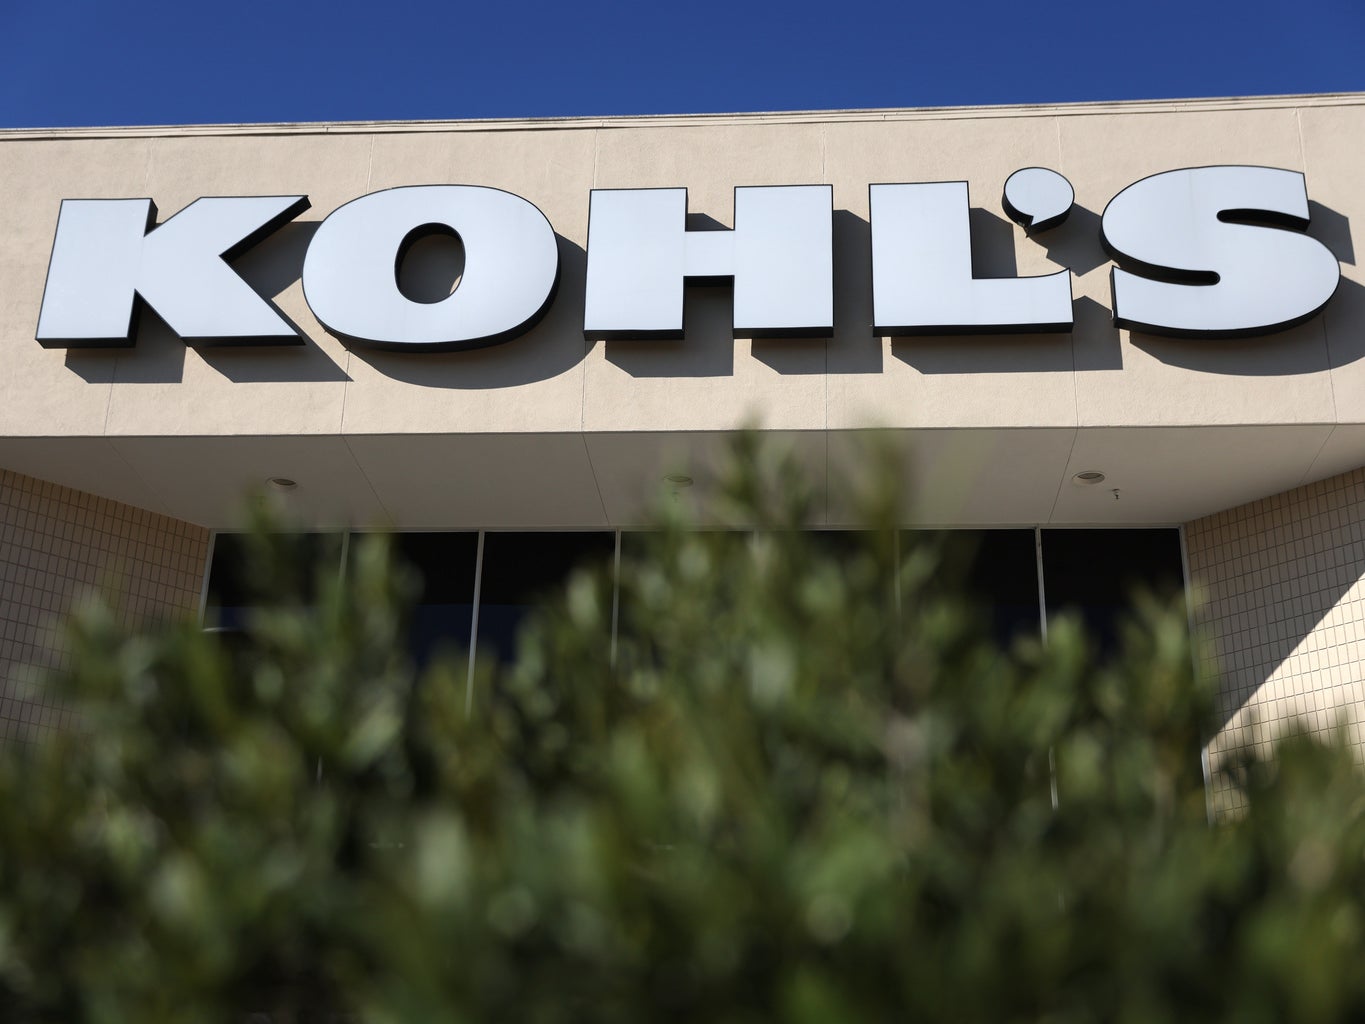 Kohl's: Mediocre Times Ahead, But Hidden Assets Are Key (NYSE:KSS